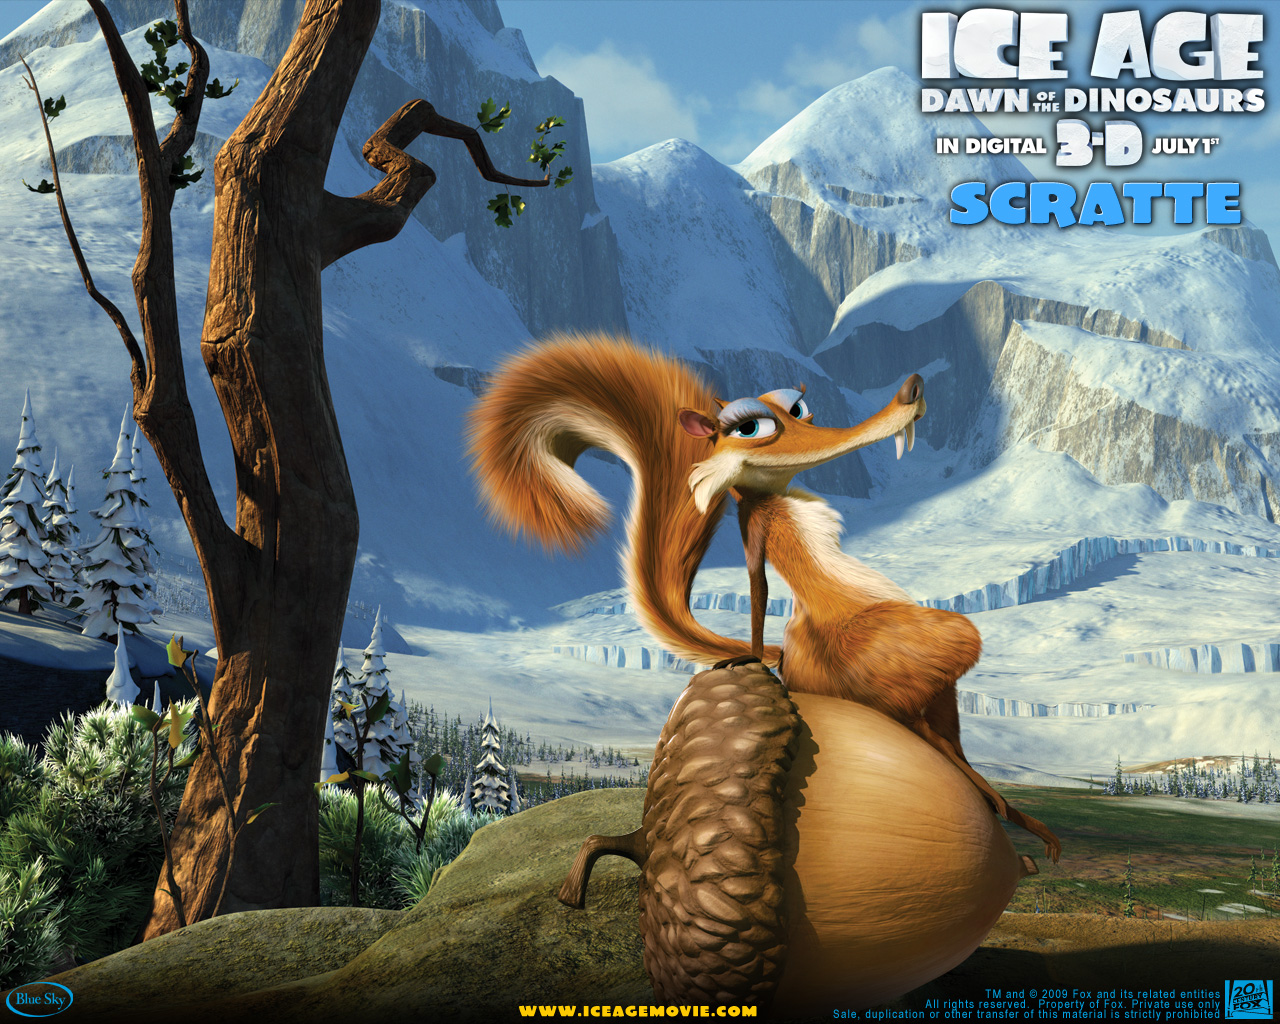 Ice Age: Dawn of the Dinosaurs Images.